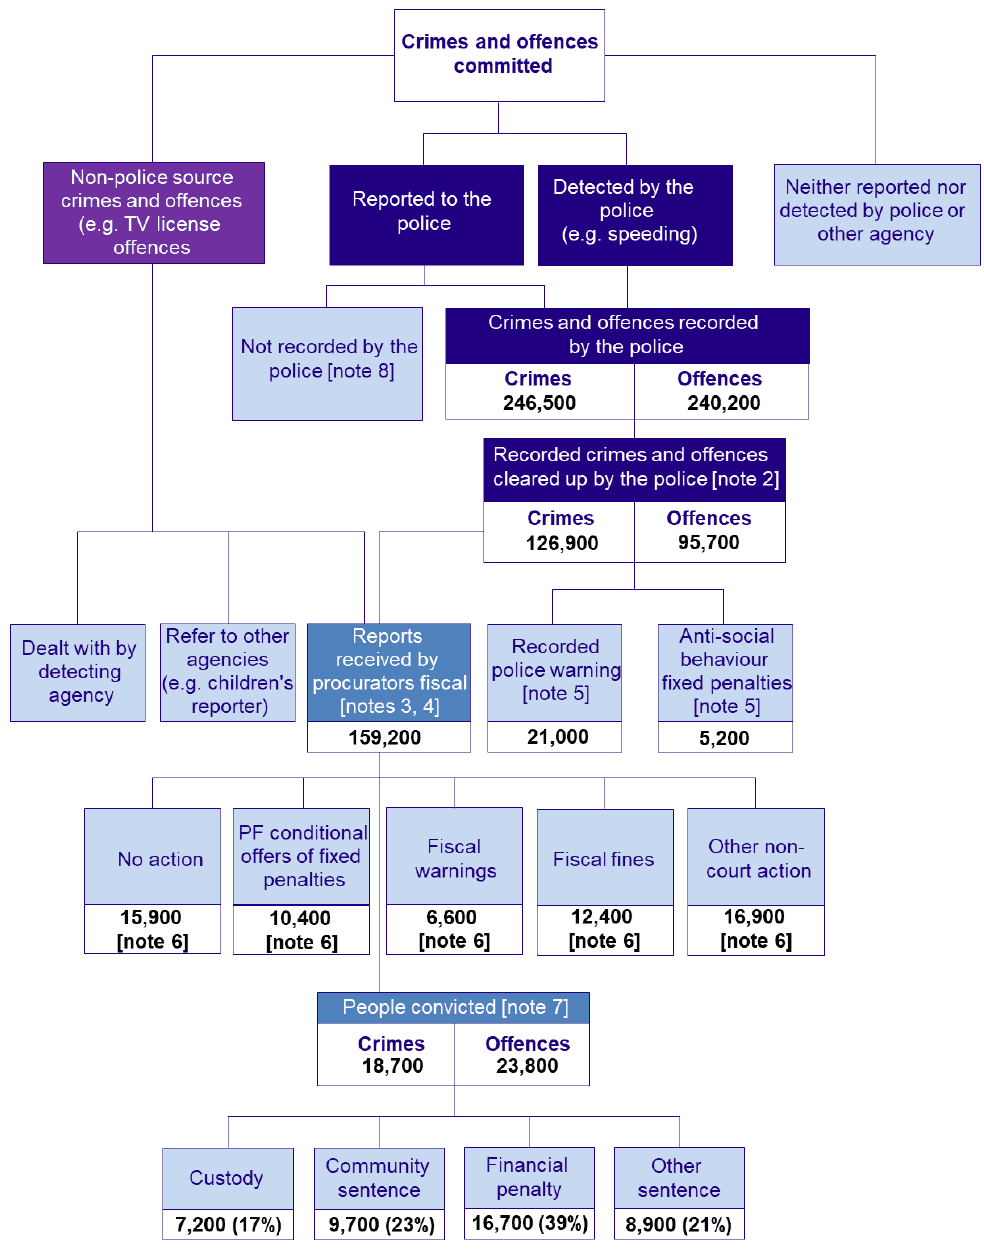 Flow chart providing an overview of actions taken within the criminal justice system from the point a crime or offence is committed.